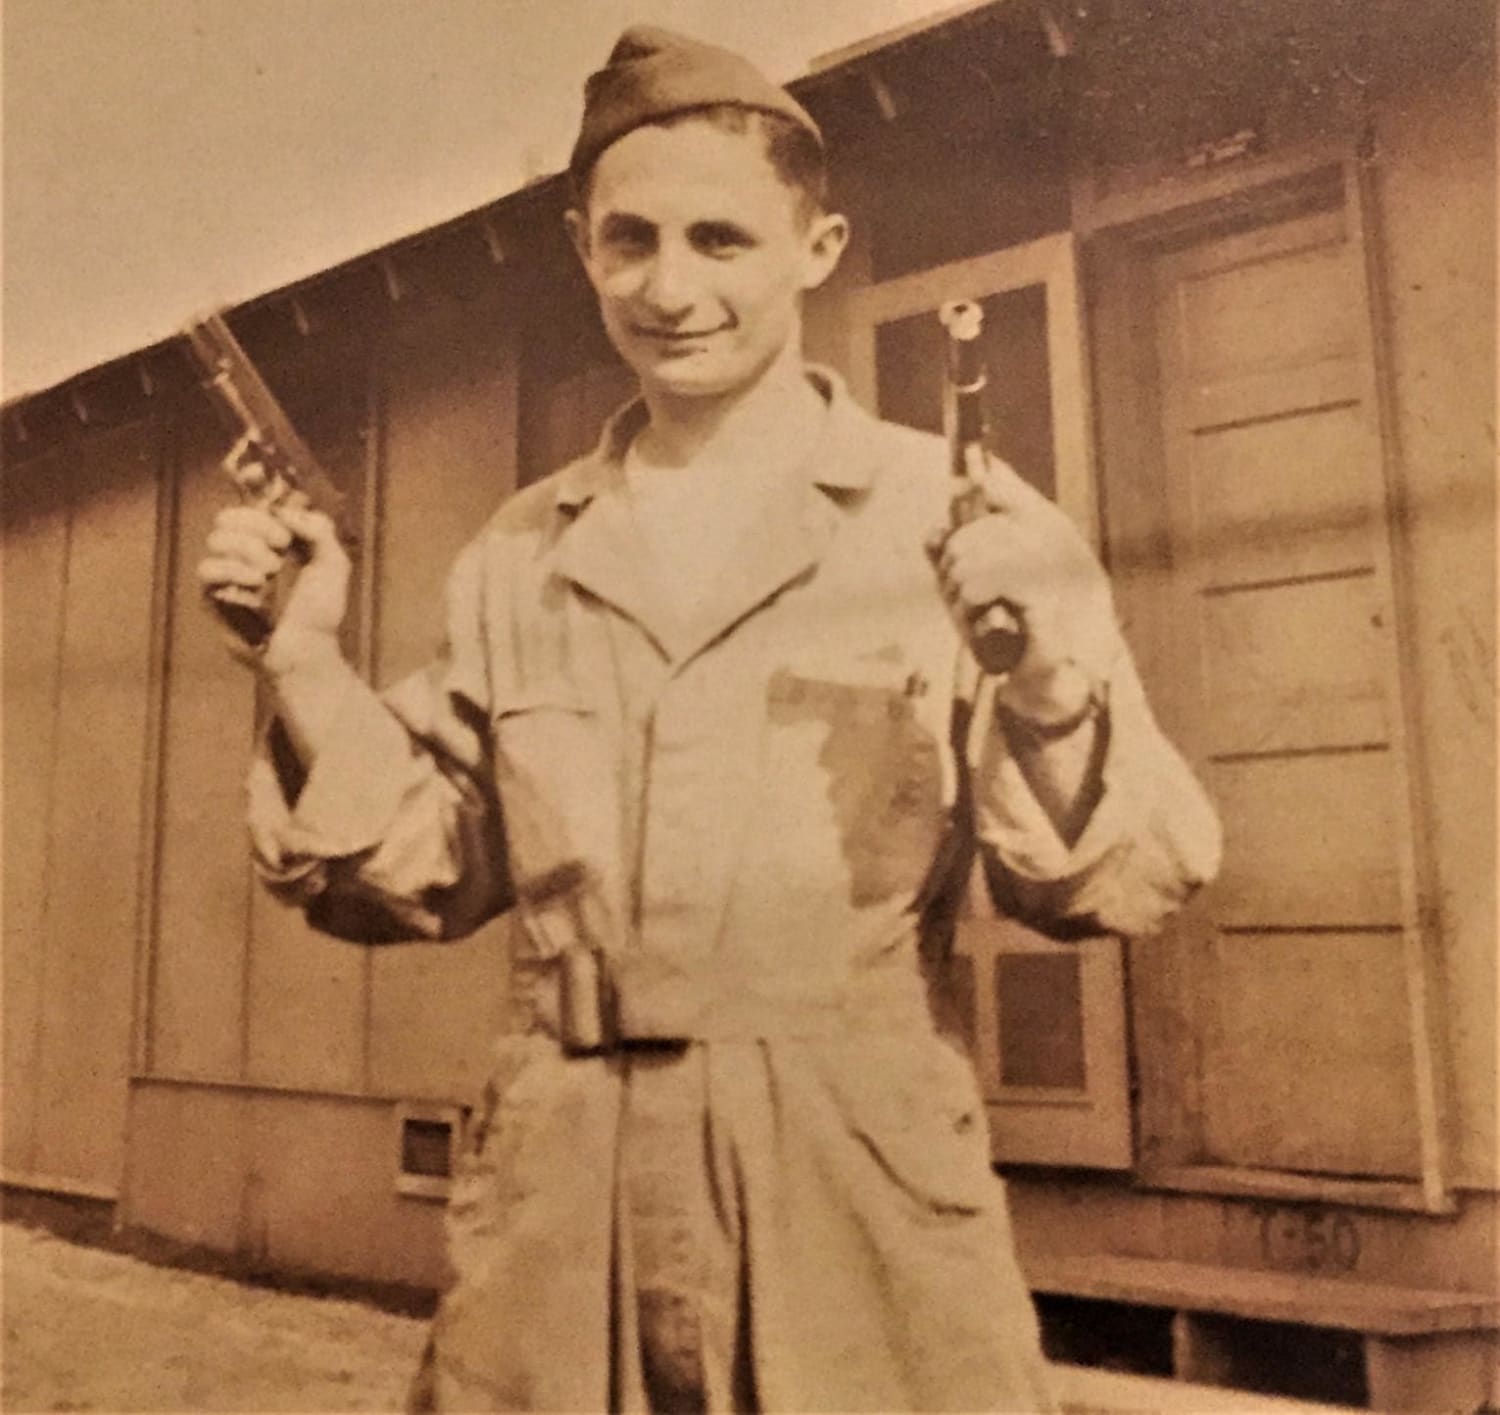 My Great Uncle Offering Nazis 1911 Reasons to Quit Their Bullshit c. 1942